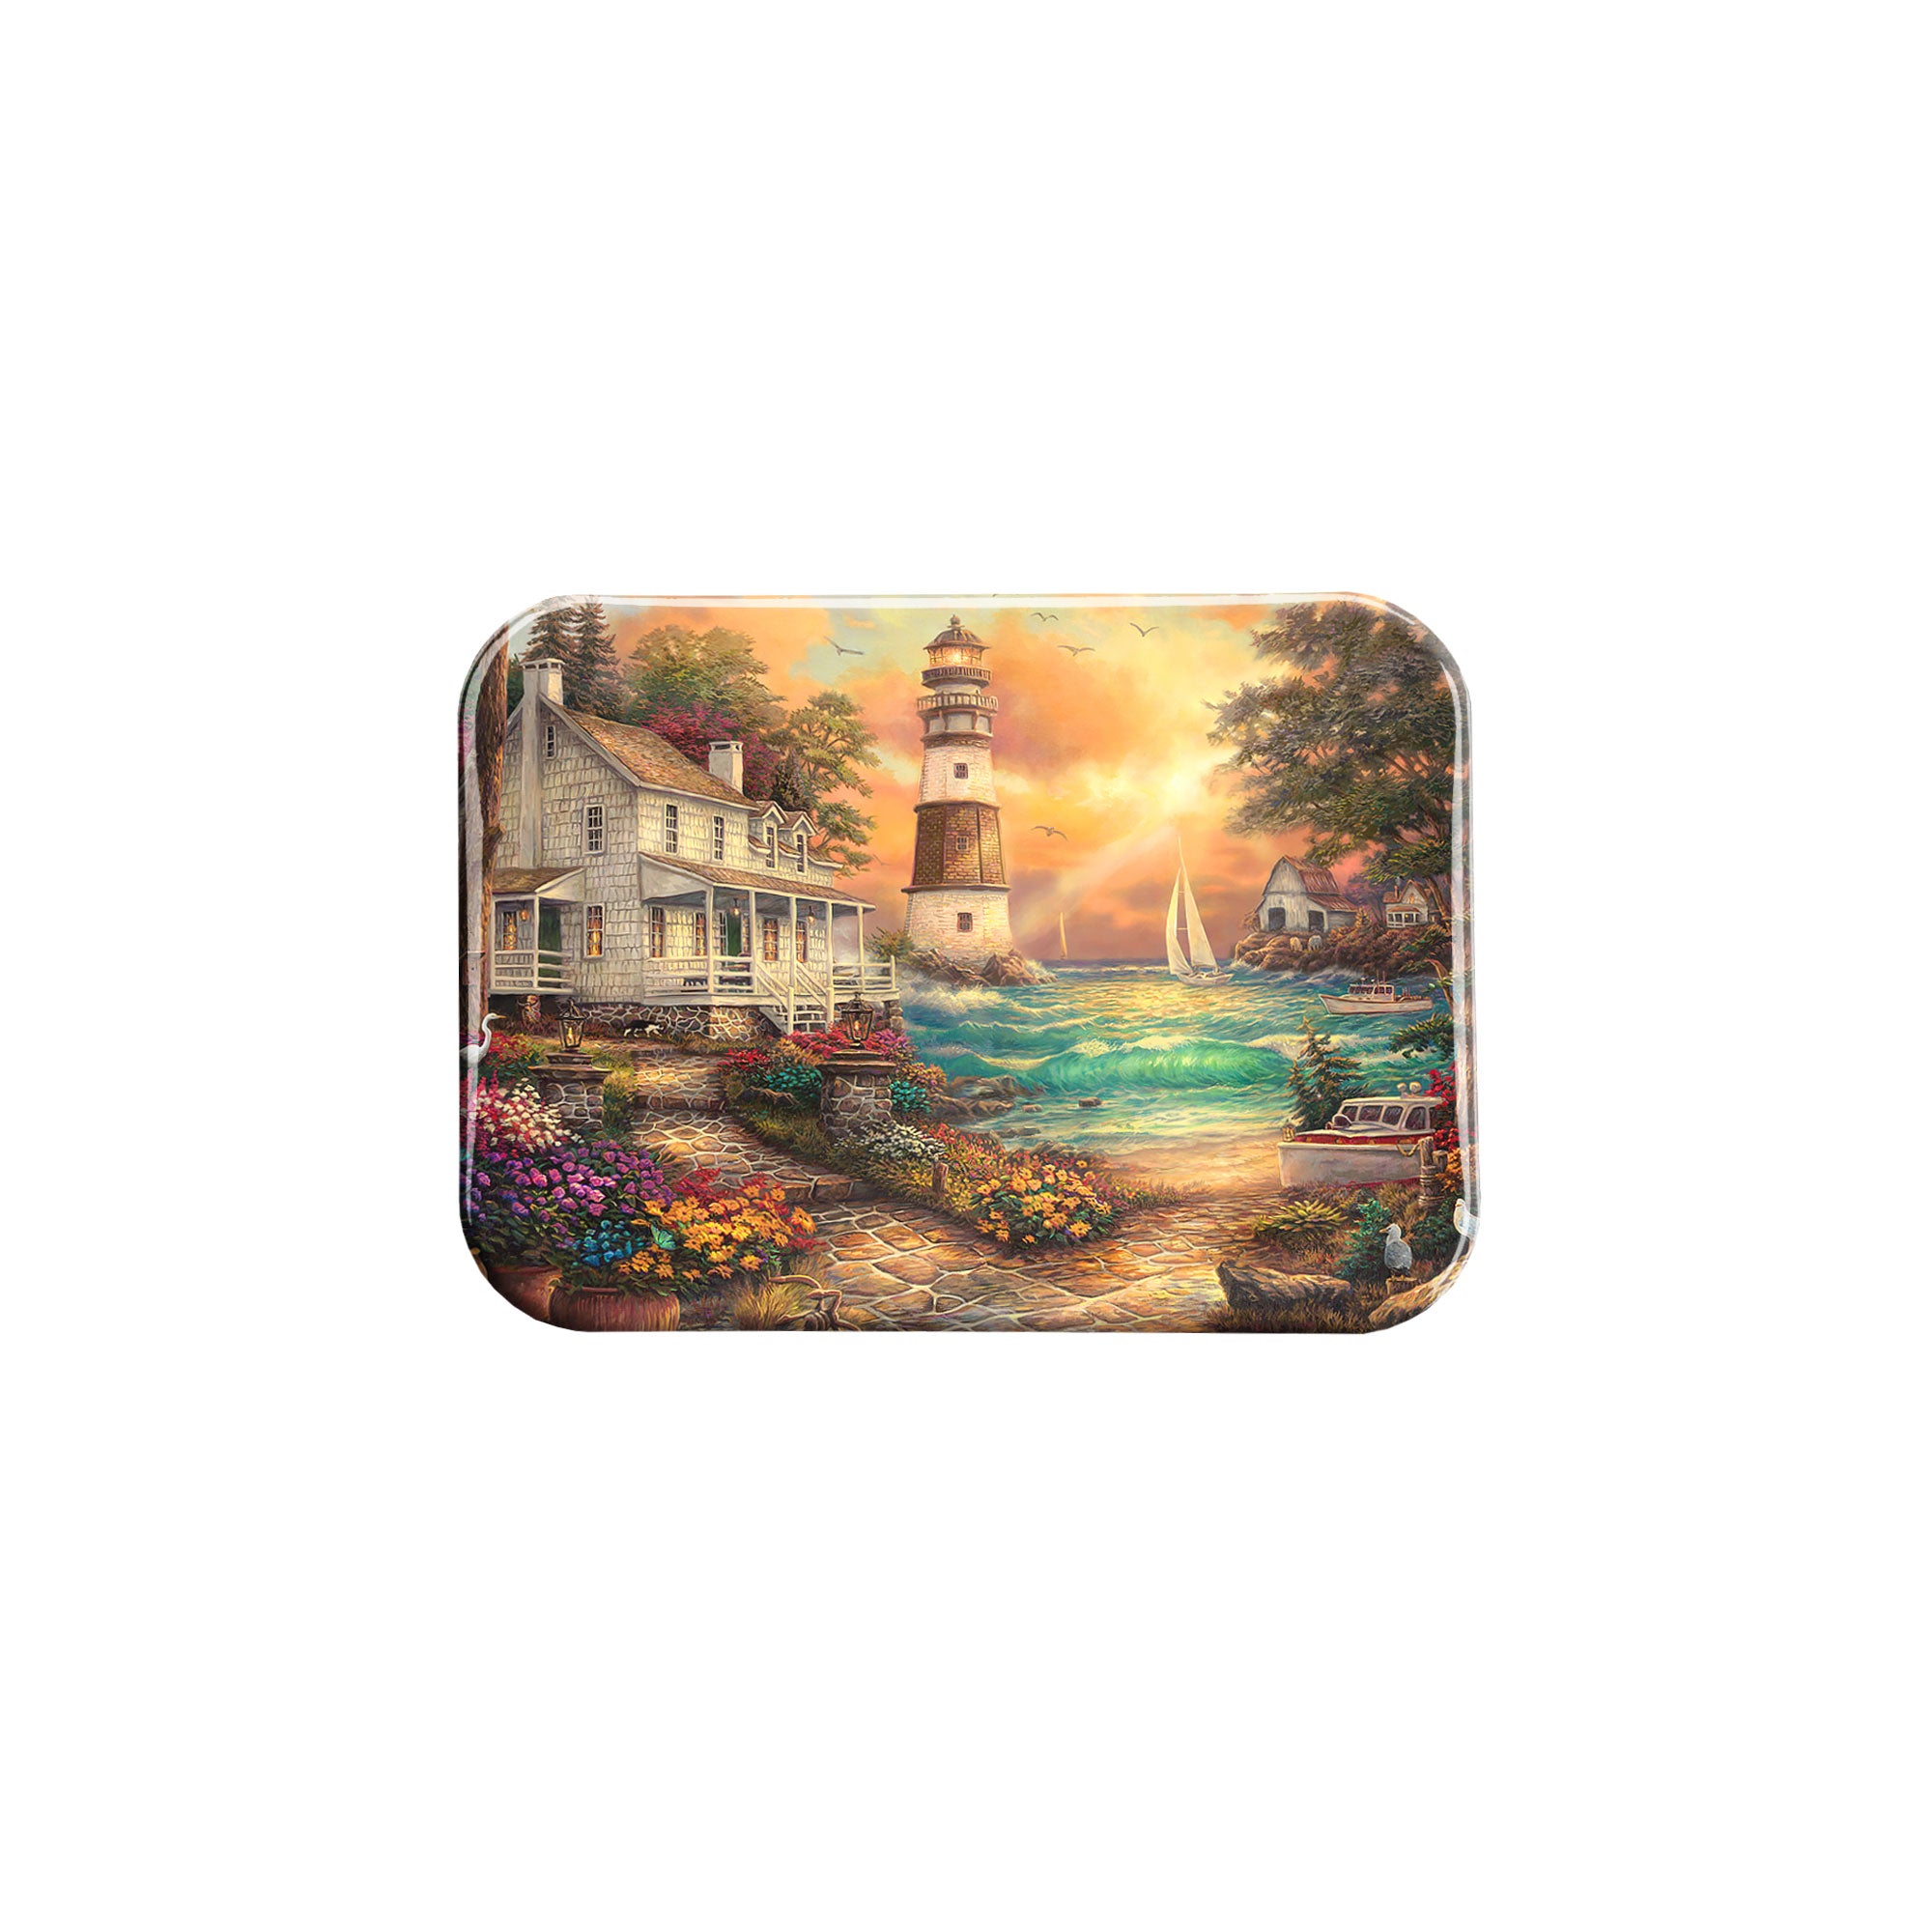 "Cottage By The Sea" - 2.5" X 3.5" Rectangle Fridge Magnets